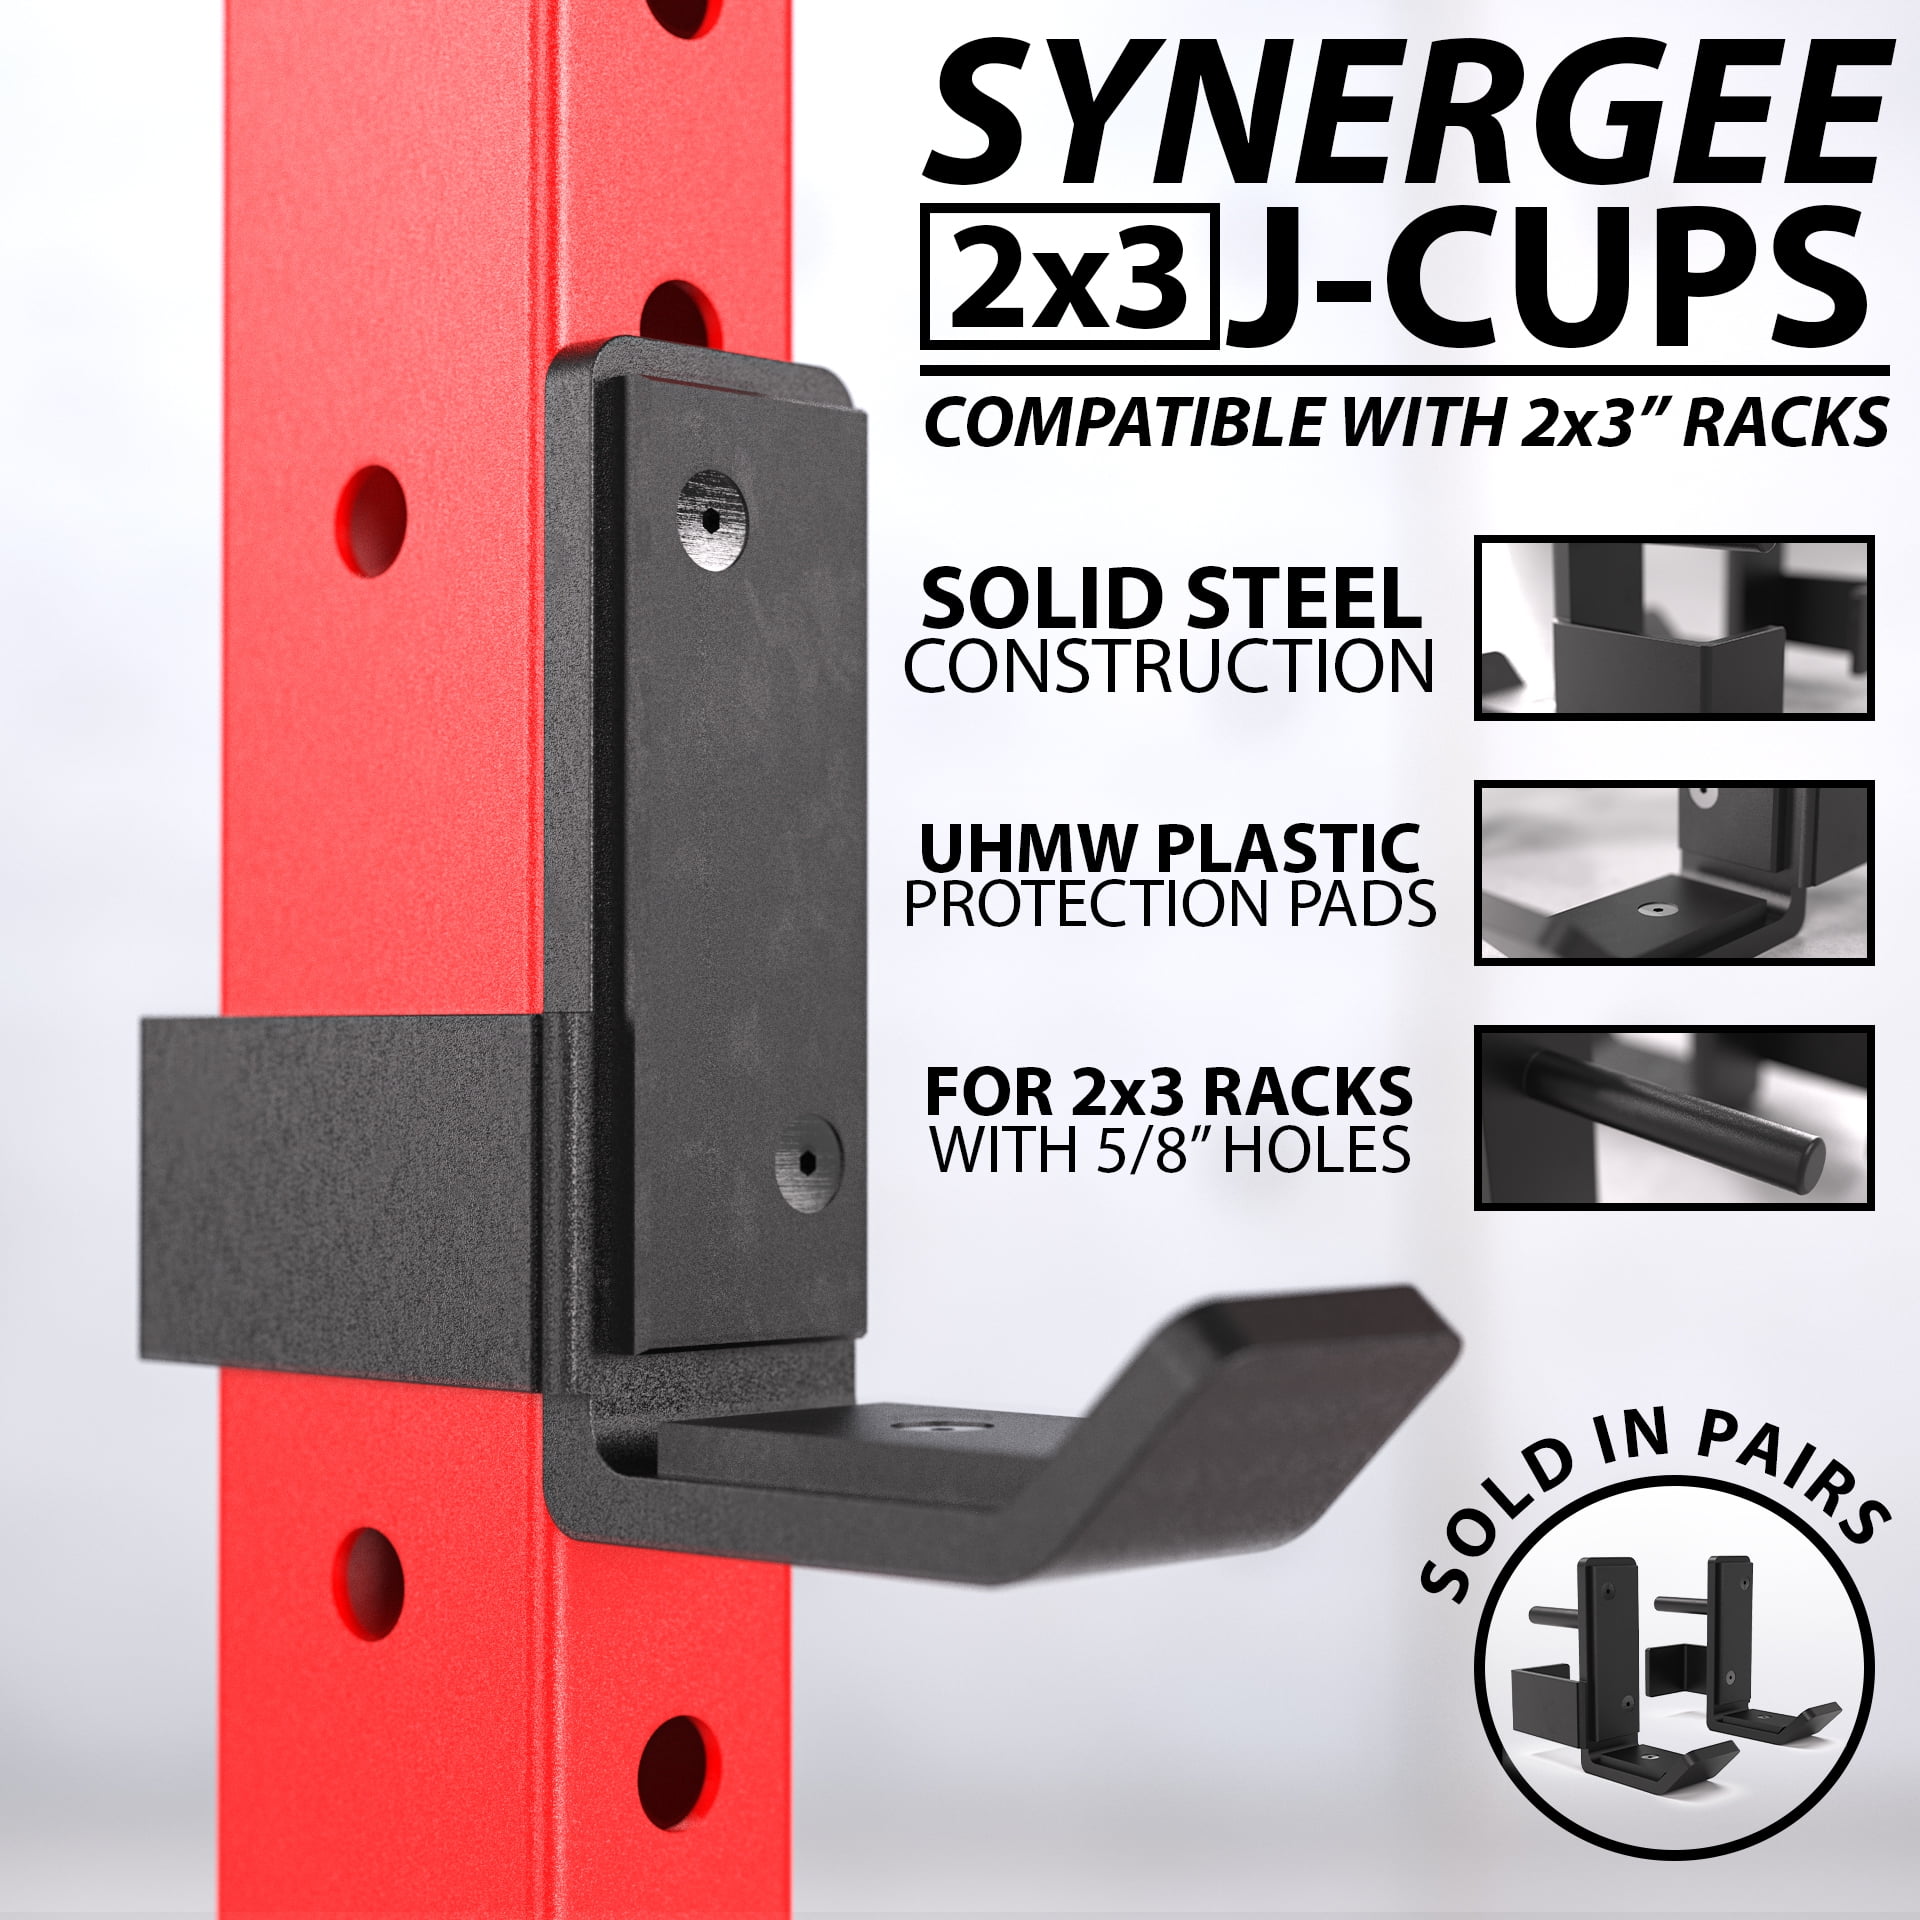 Synergee Power and Squat Rack Attachment 2x3 J-Cups Designed for 5/8” Hole.  J-Hook for Power Lifting, Squats and Presses. Sold in Pairs. 